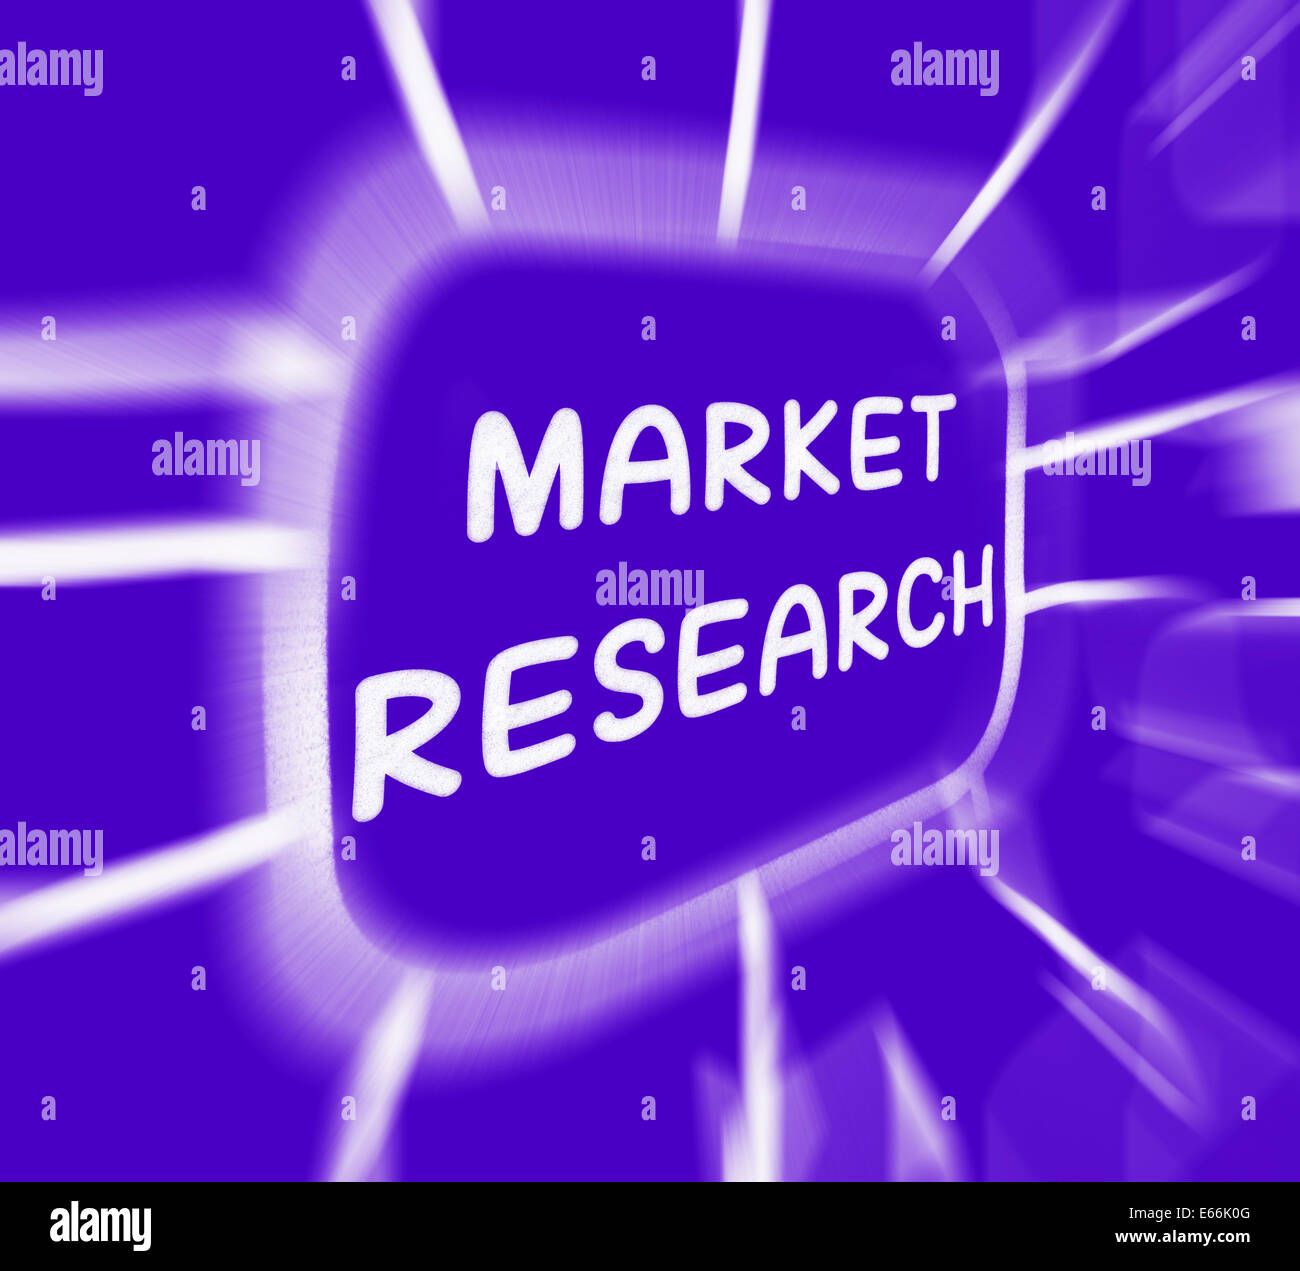 Market Research Diagram Displaying Researching Consumer Demand And Preferences Stock Photo